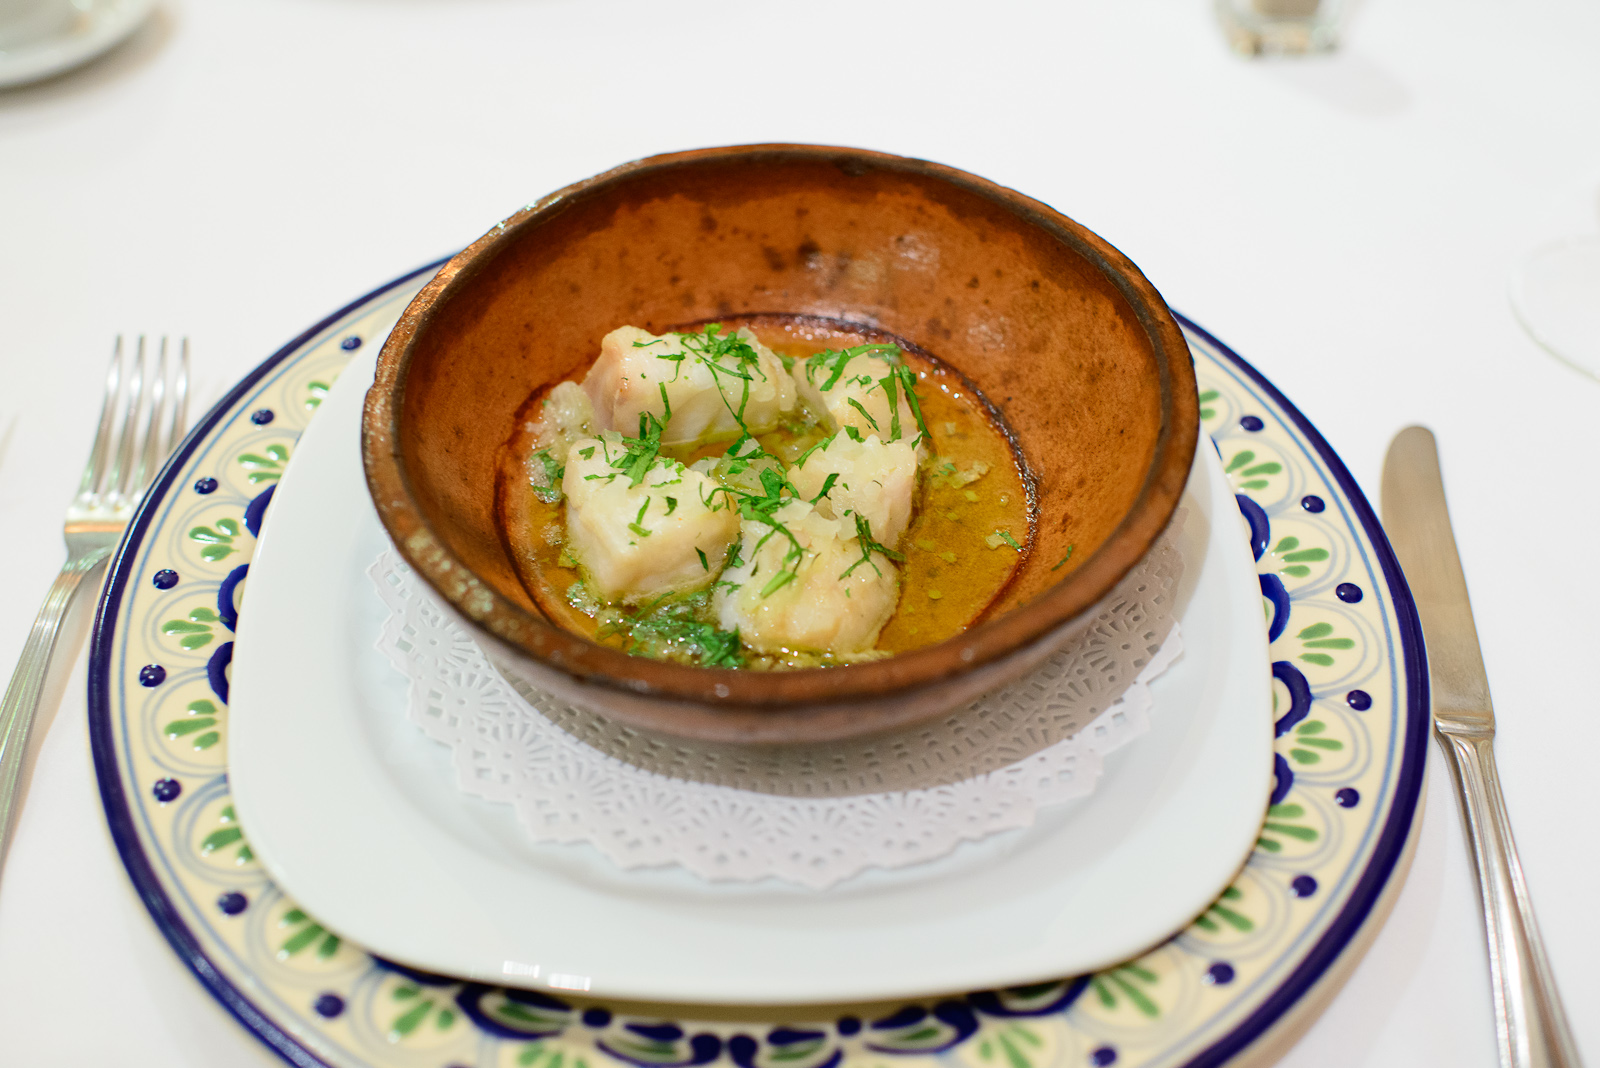 Robalo en cazuela - Snook cooked in a cazuela with butter, olive